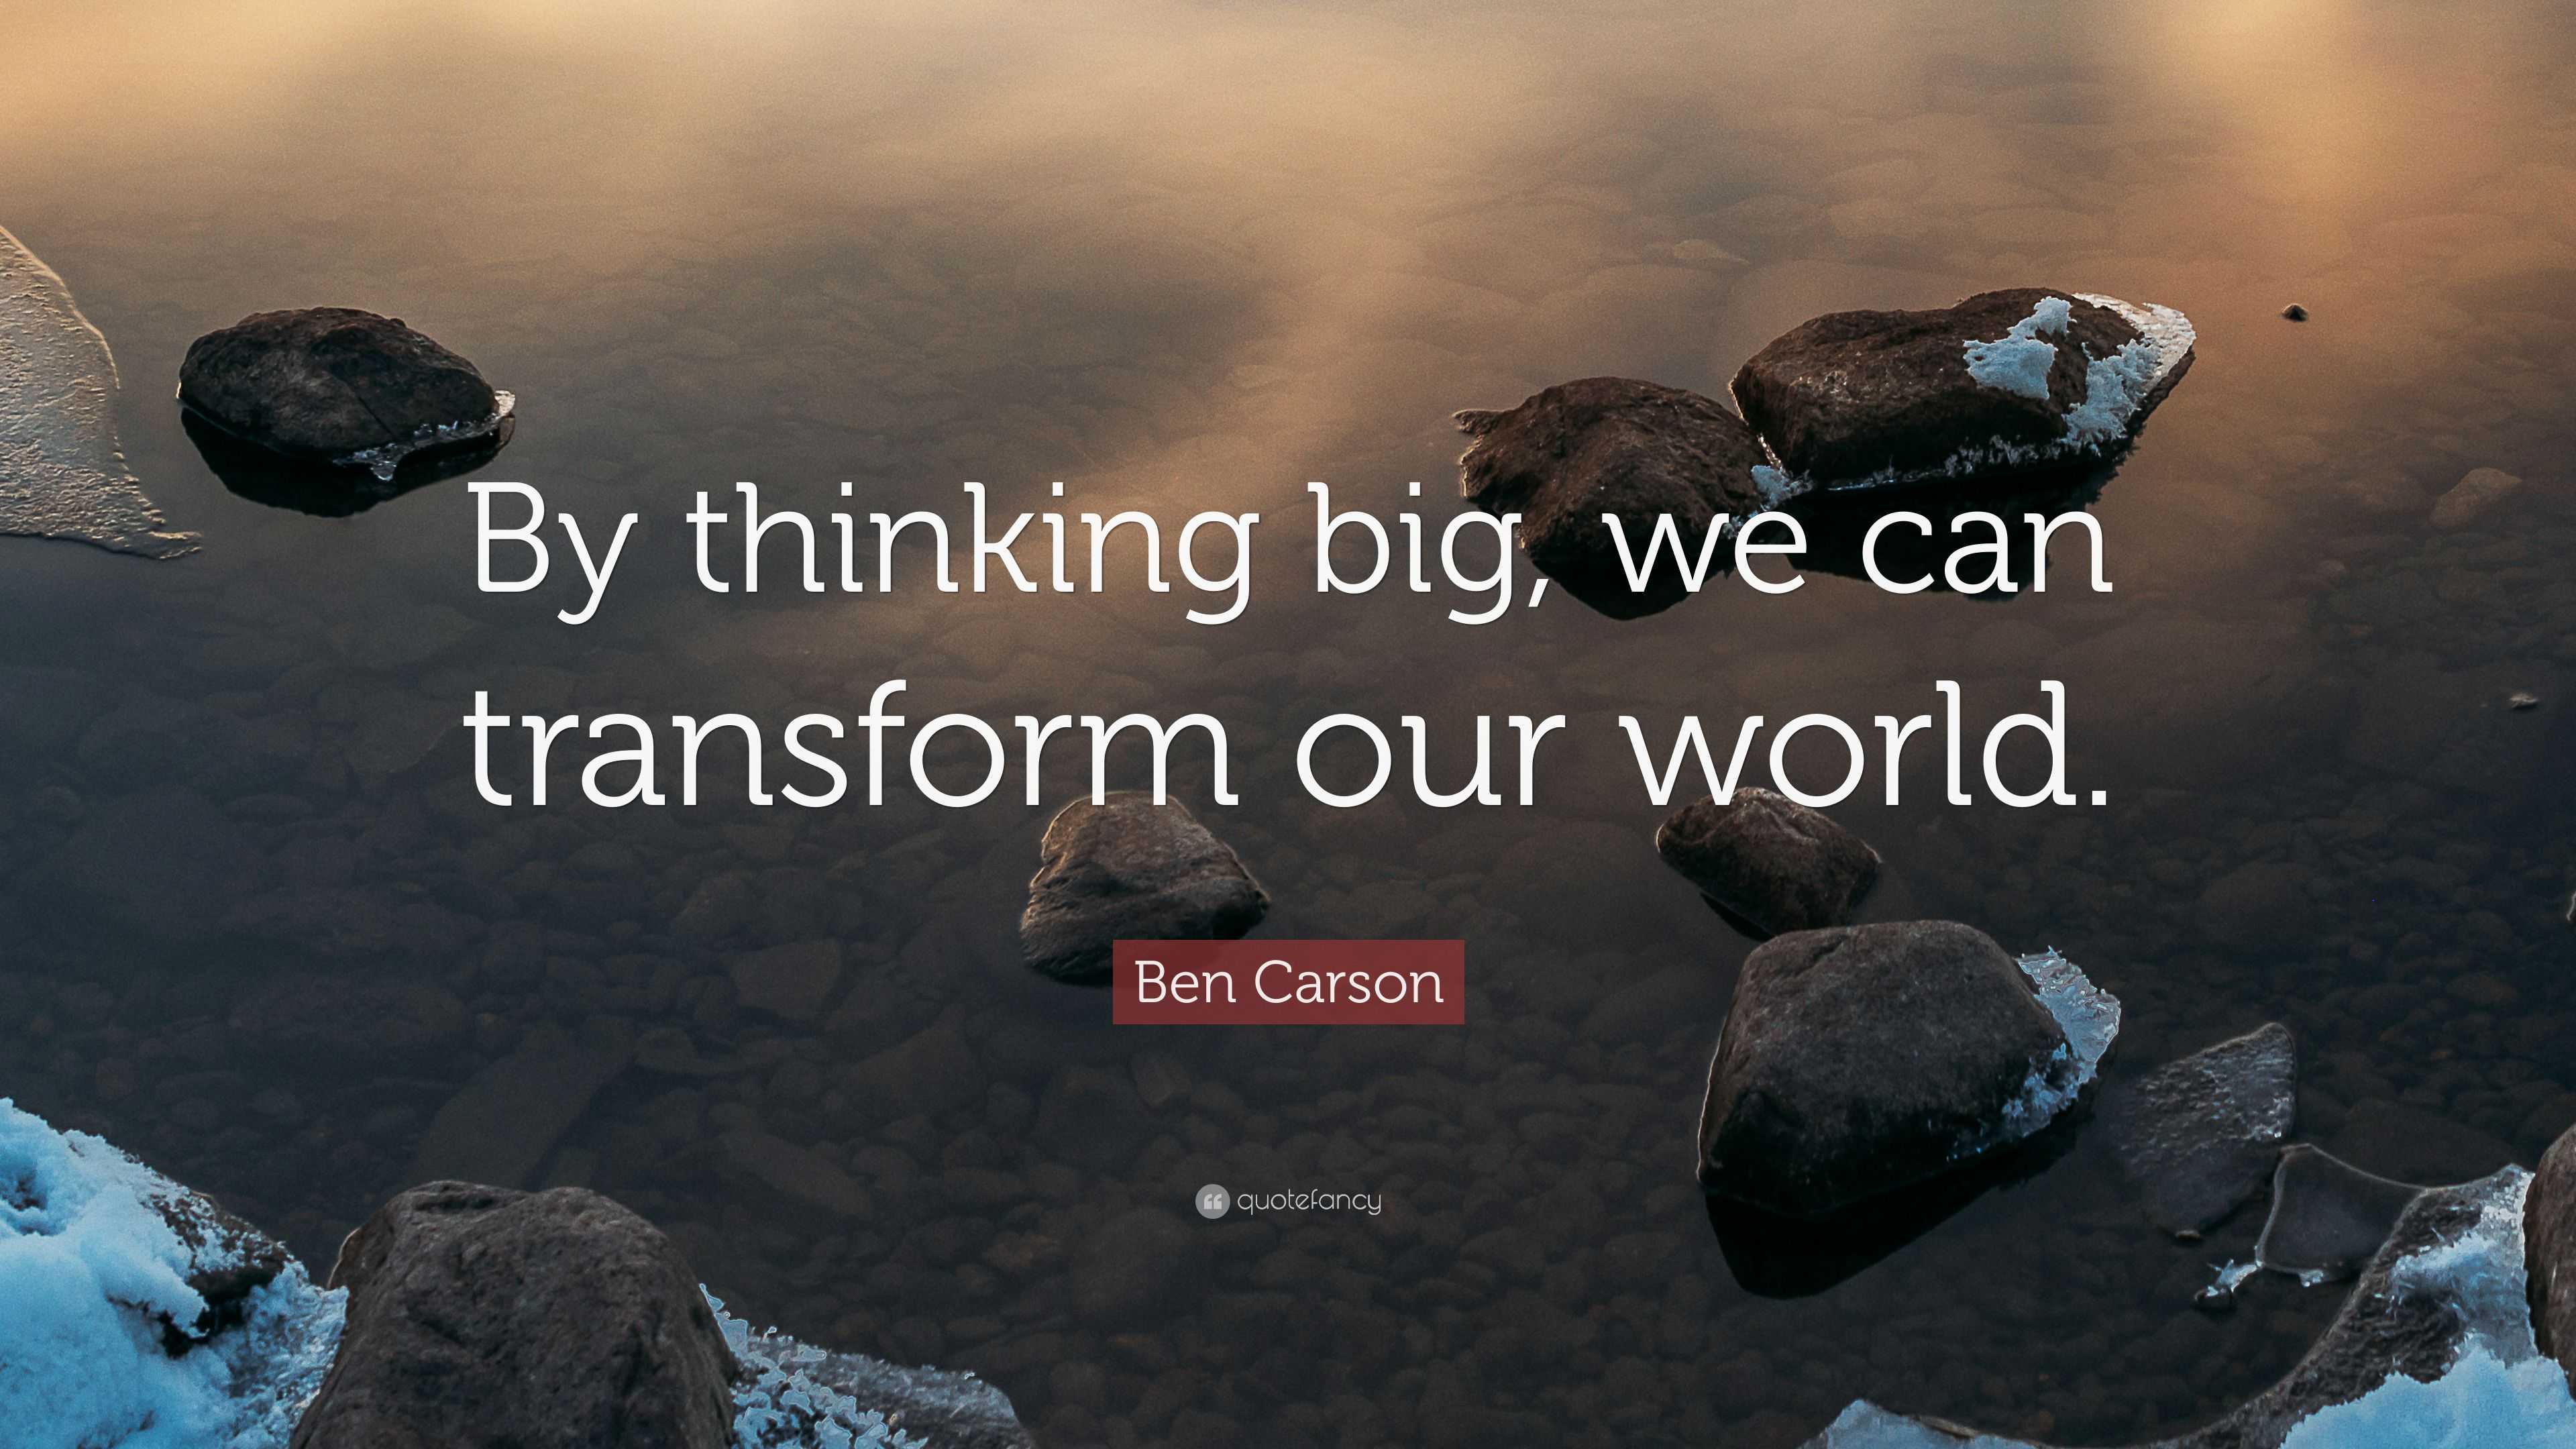 where was think big by ben carson published